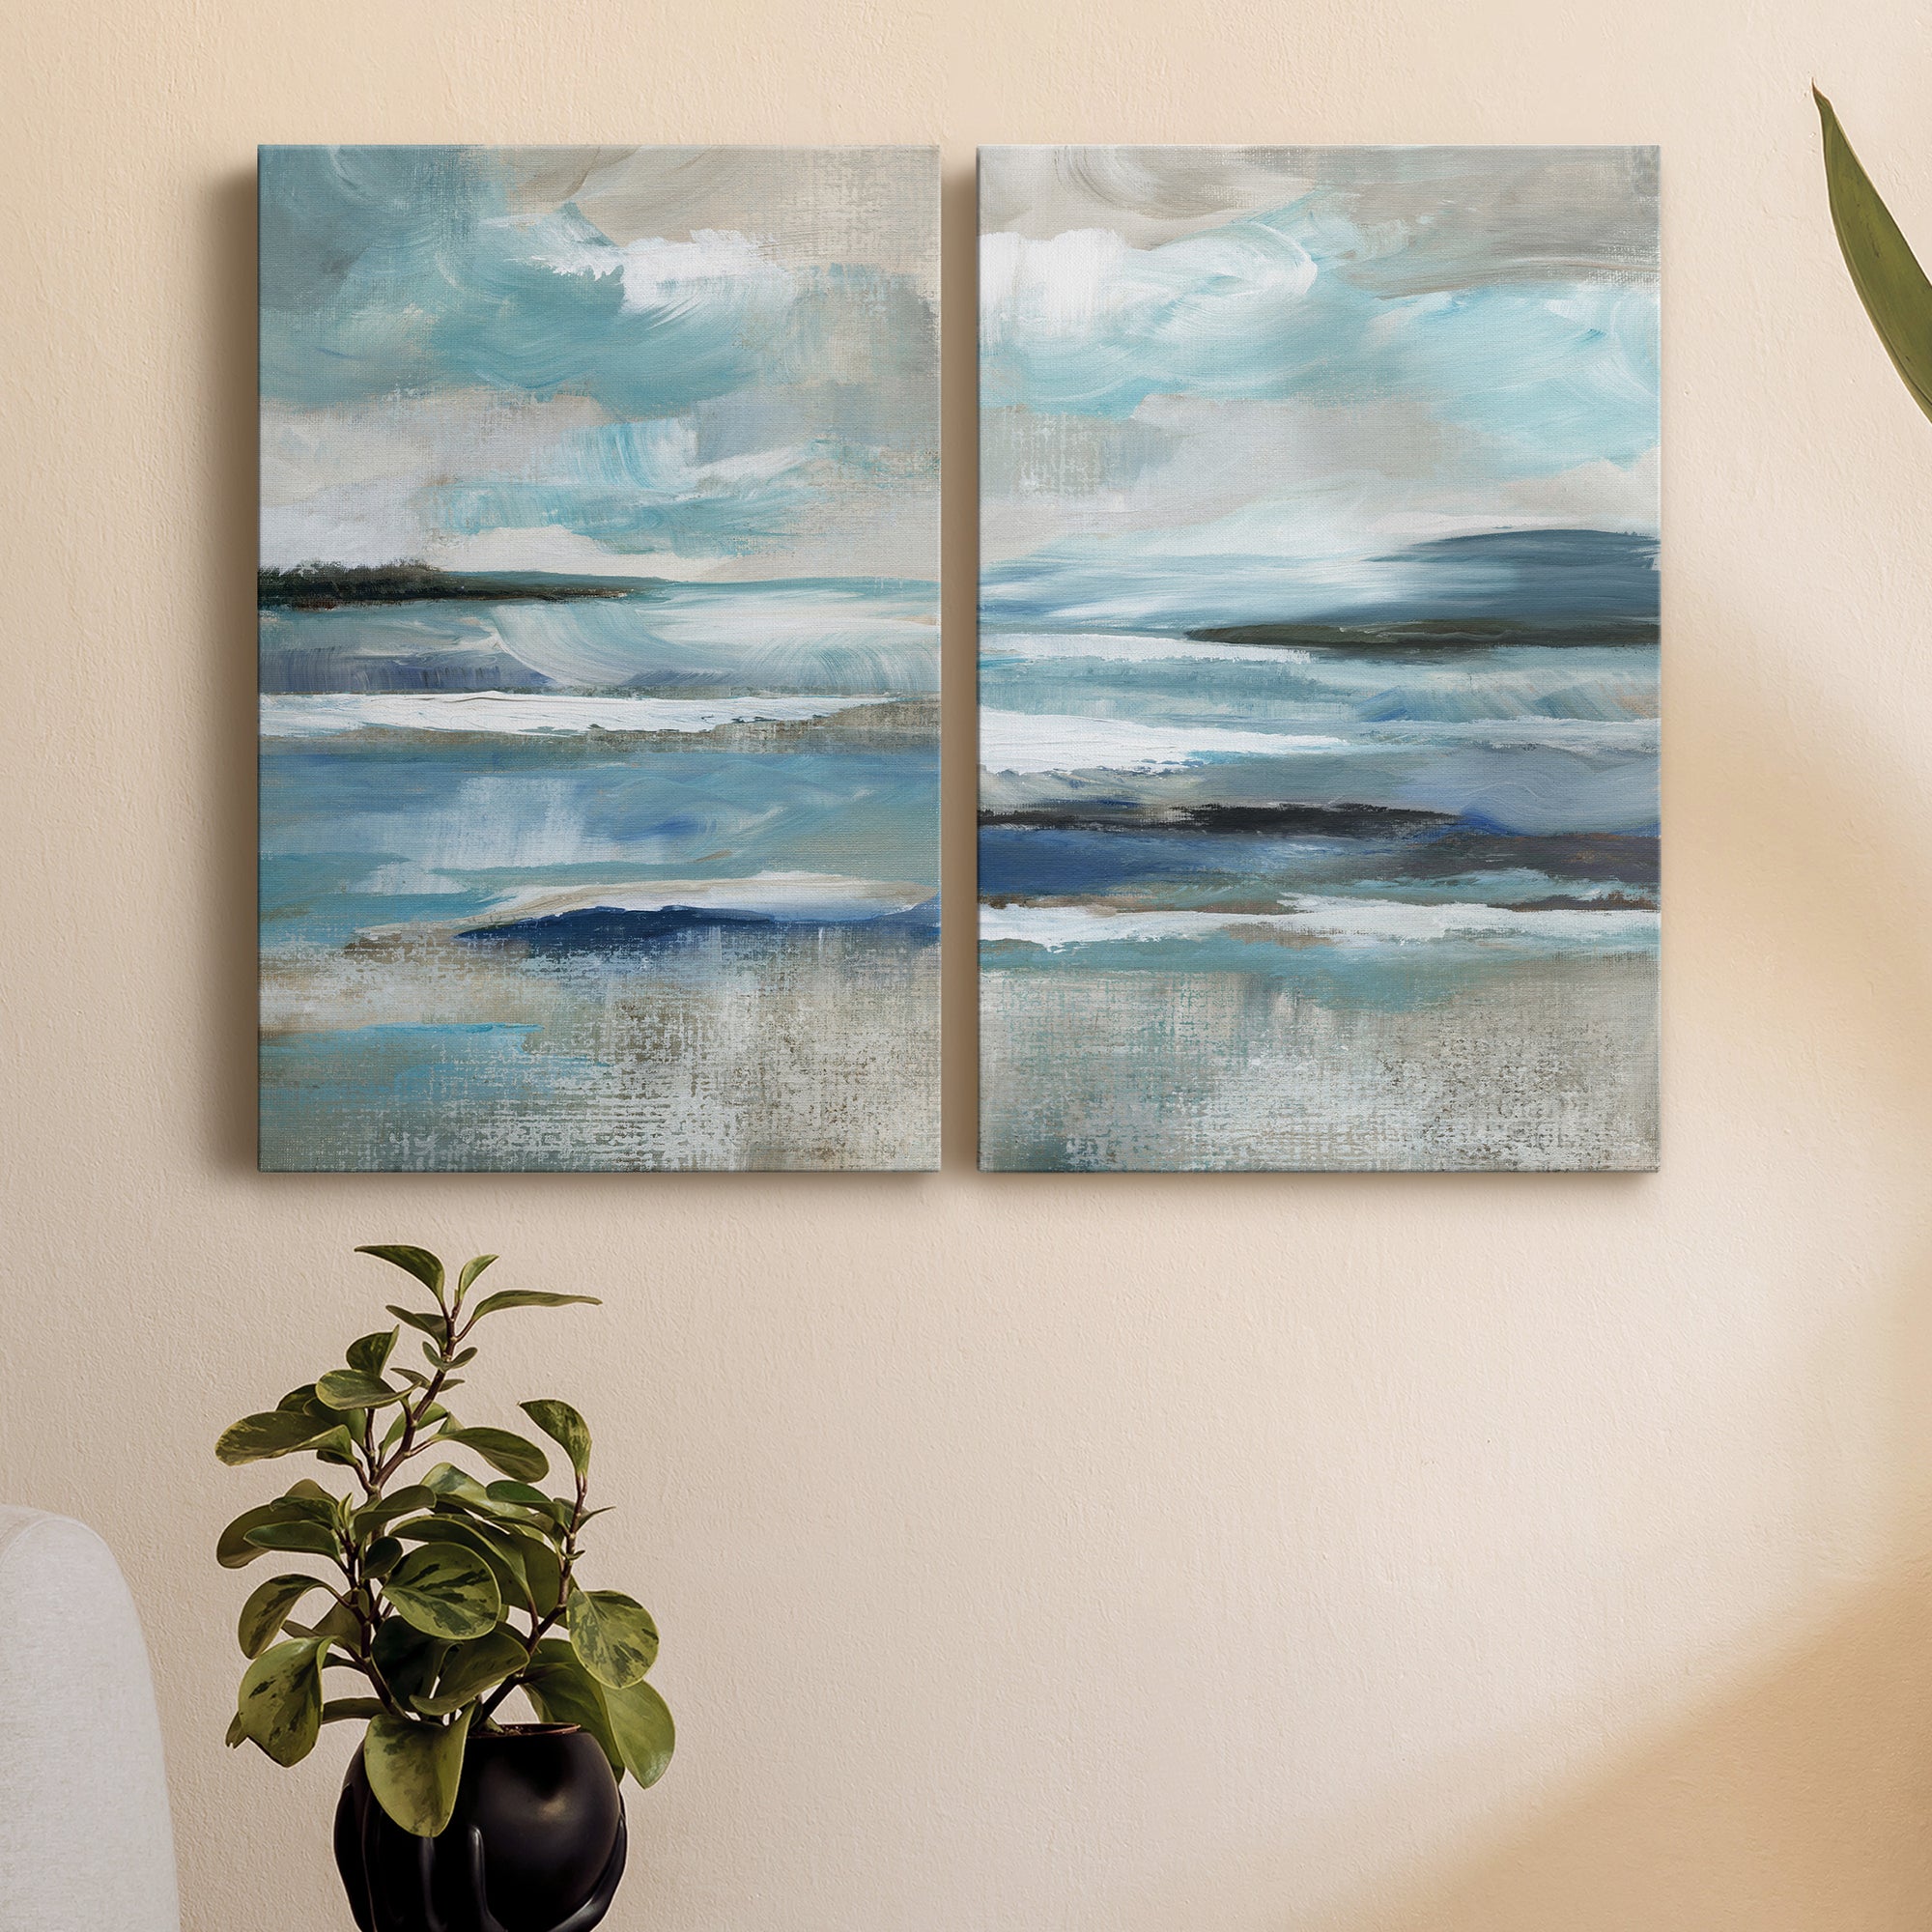 Distant Drama I Premium Gallery Wrapped Canvas - Ready to Hang - Set of 2 - 8 x 12 Each